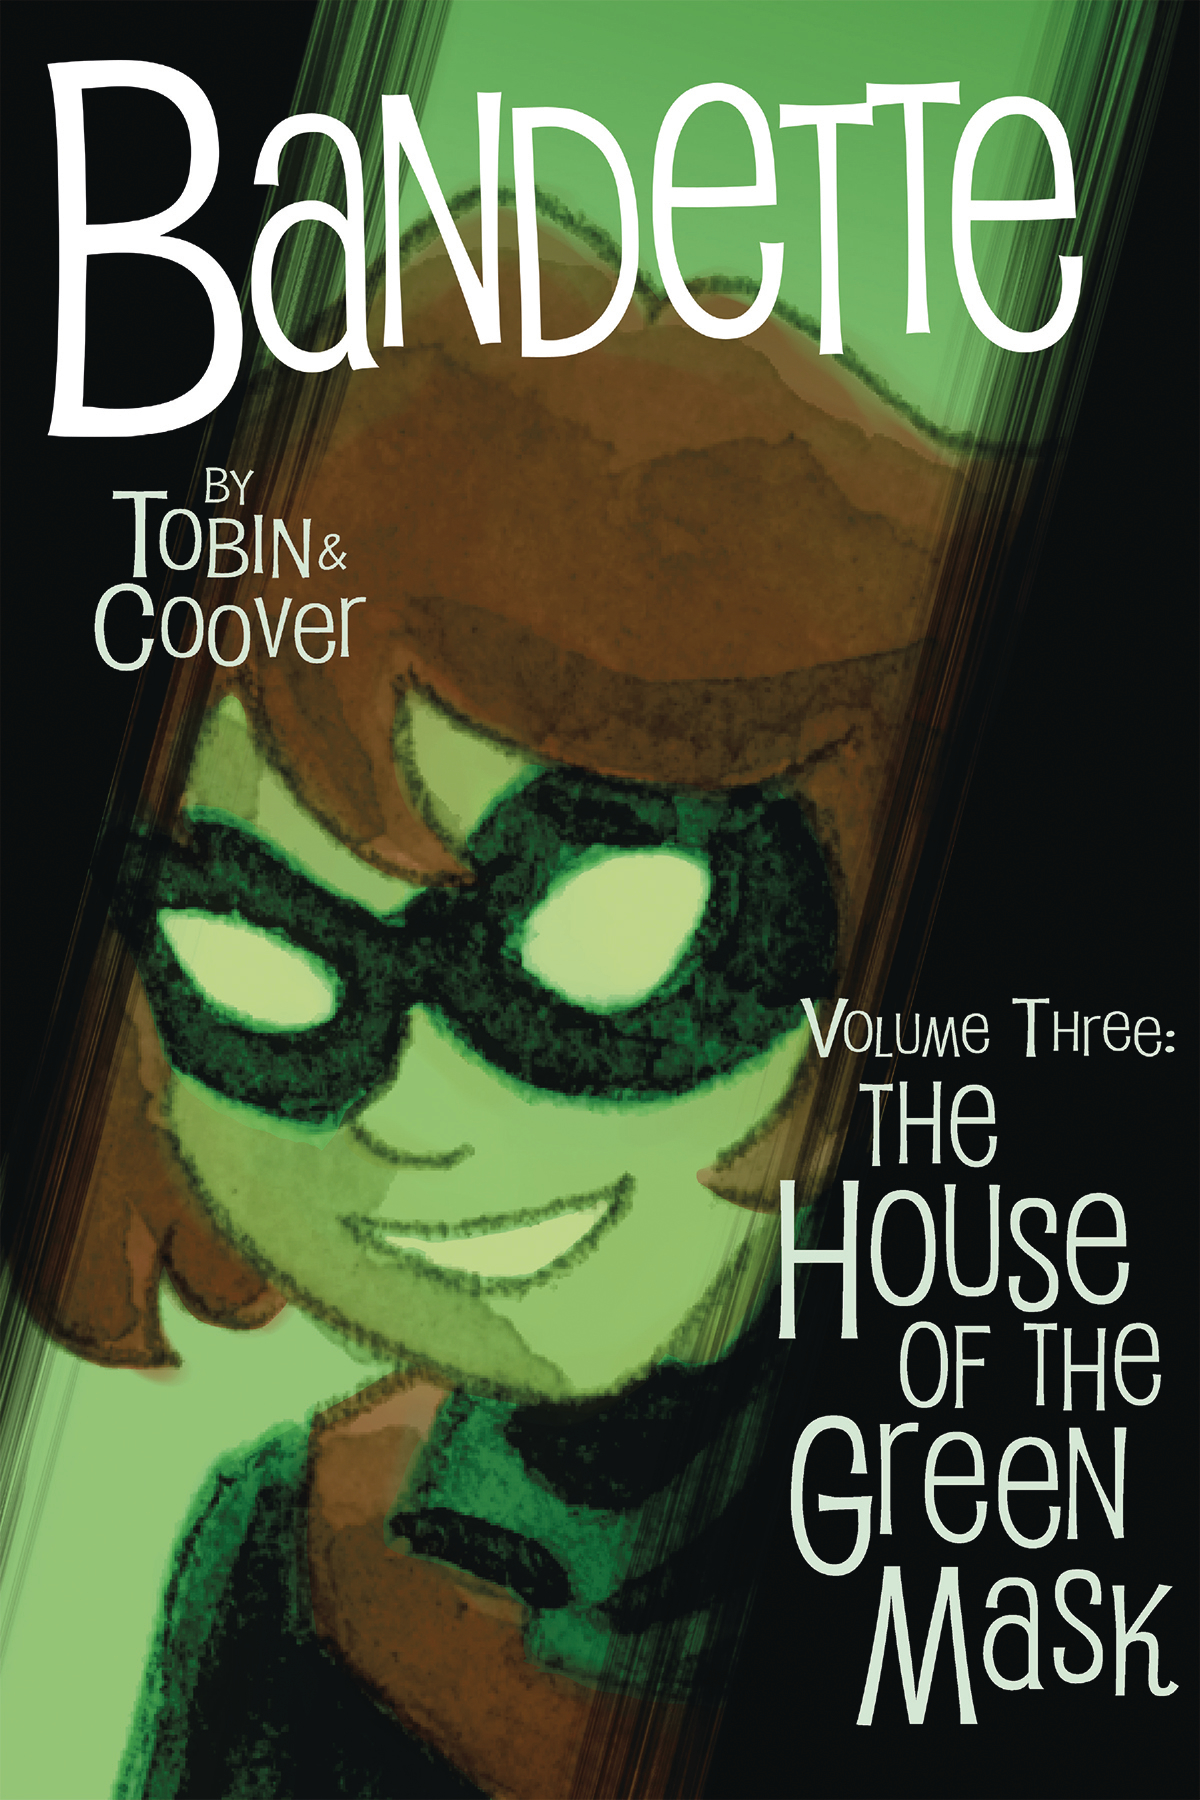 Bandette Graphic Novel Volume 3 The House of the Green Mask